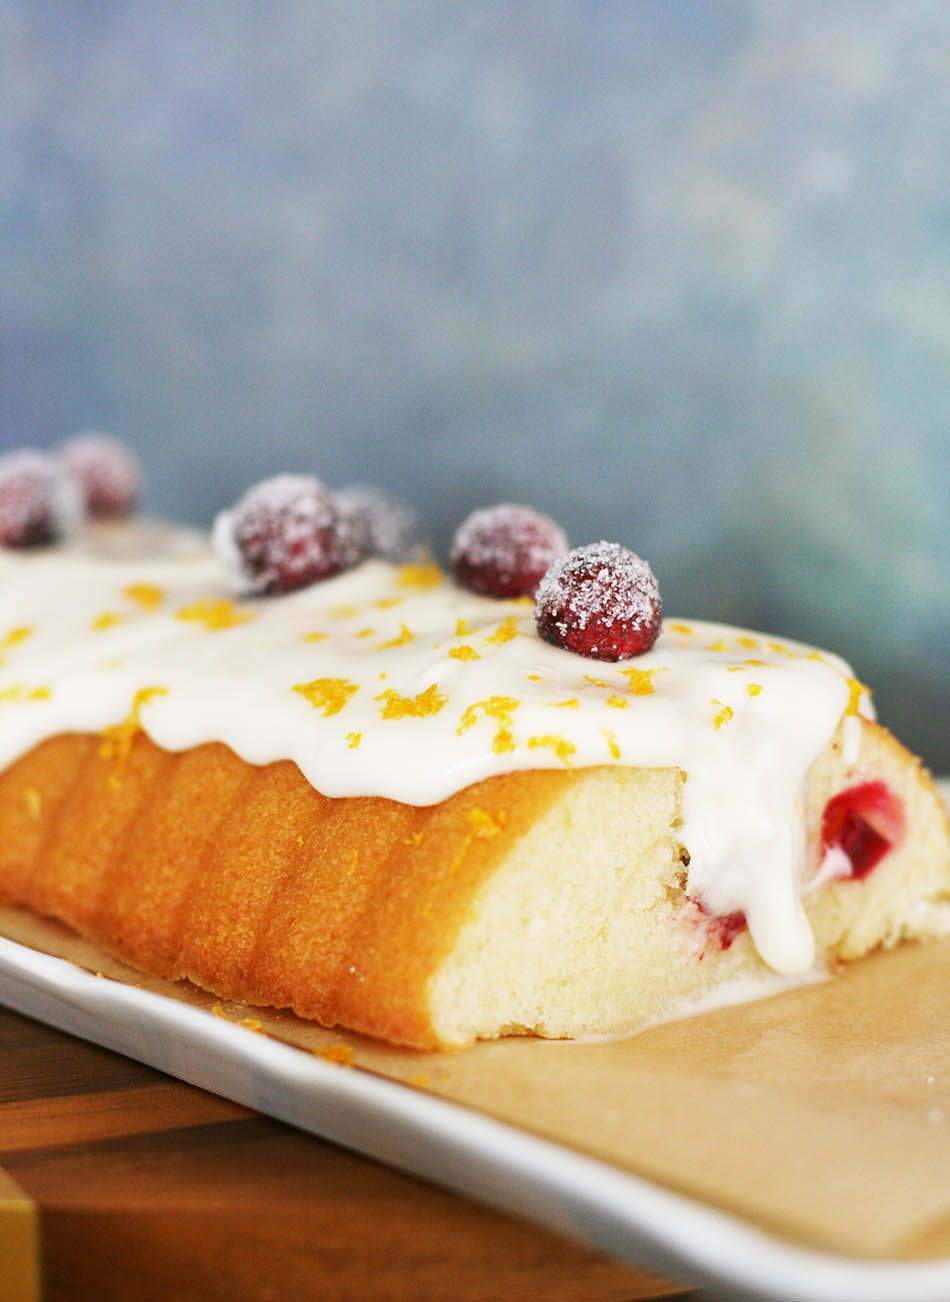 Cranberry almond cake with candied cranberries: Click through for recipe.